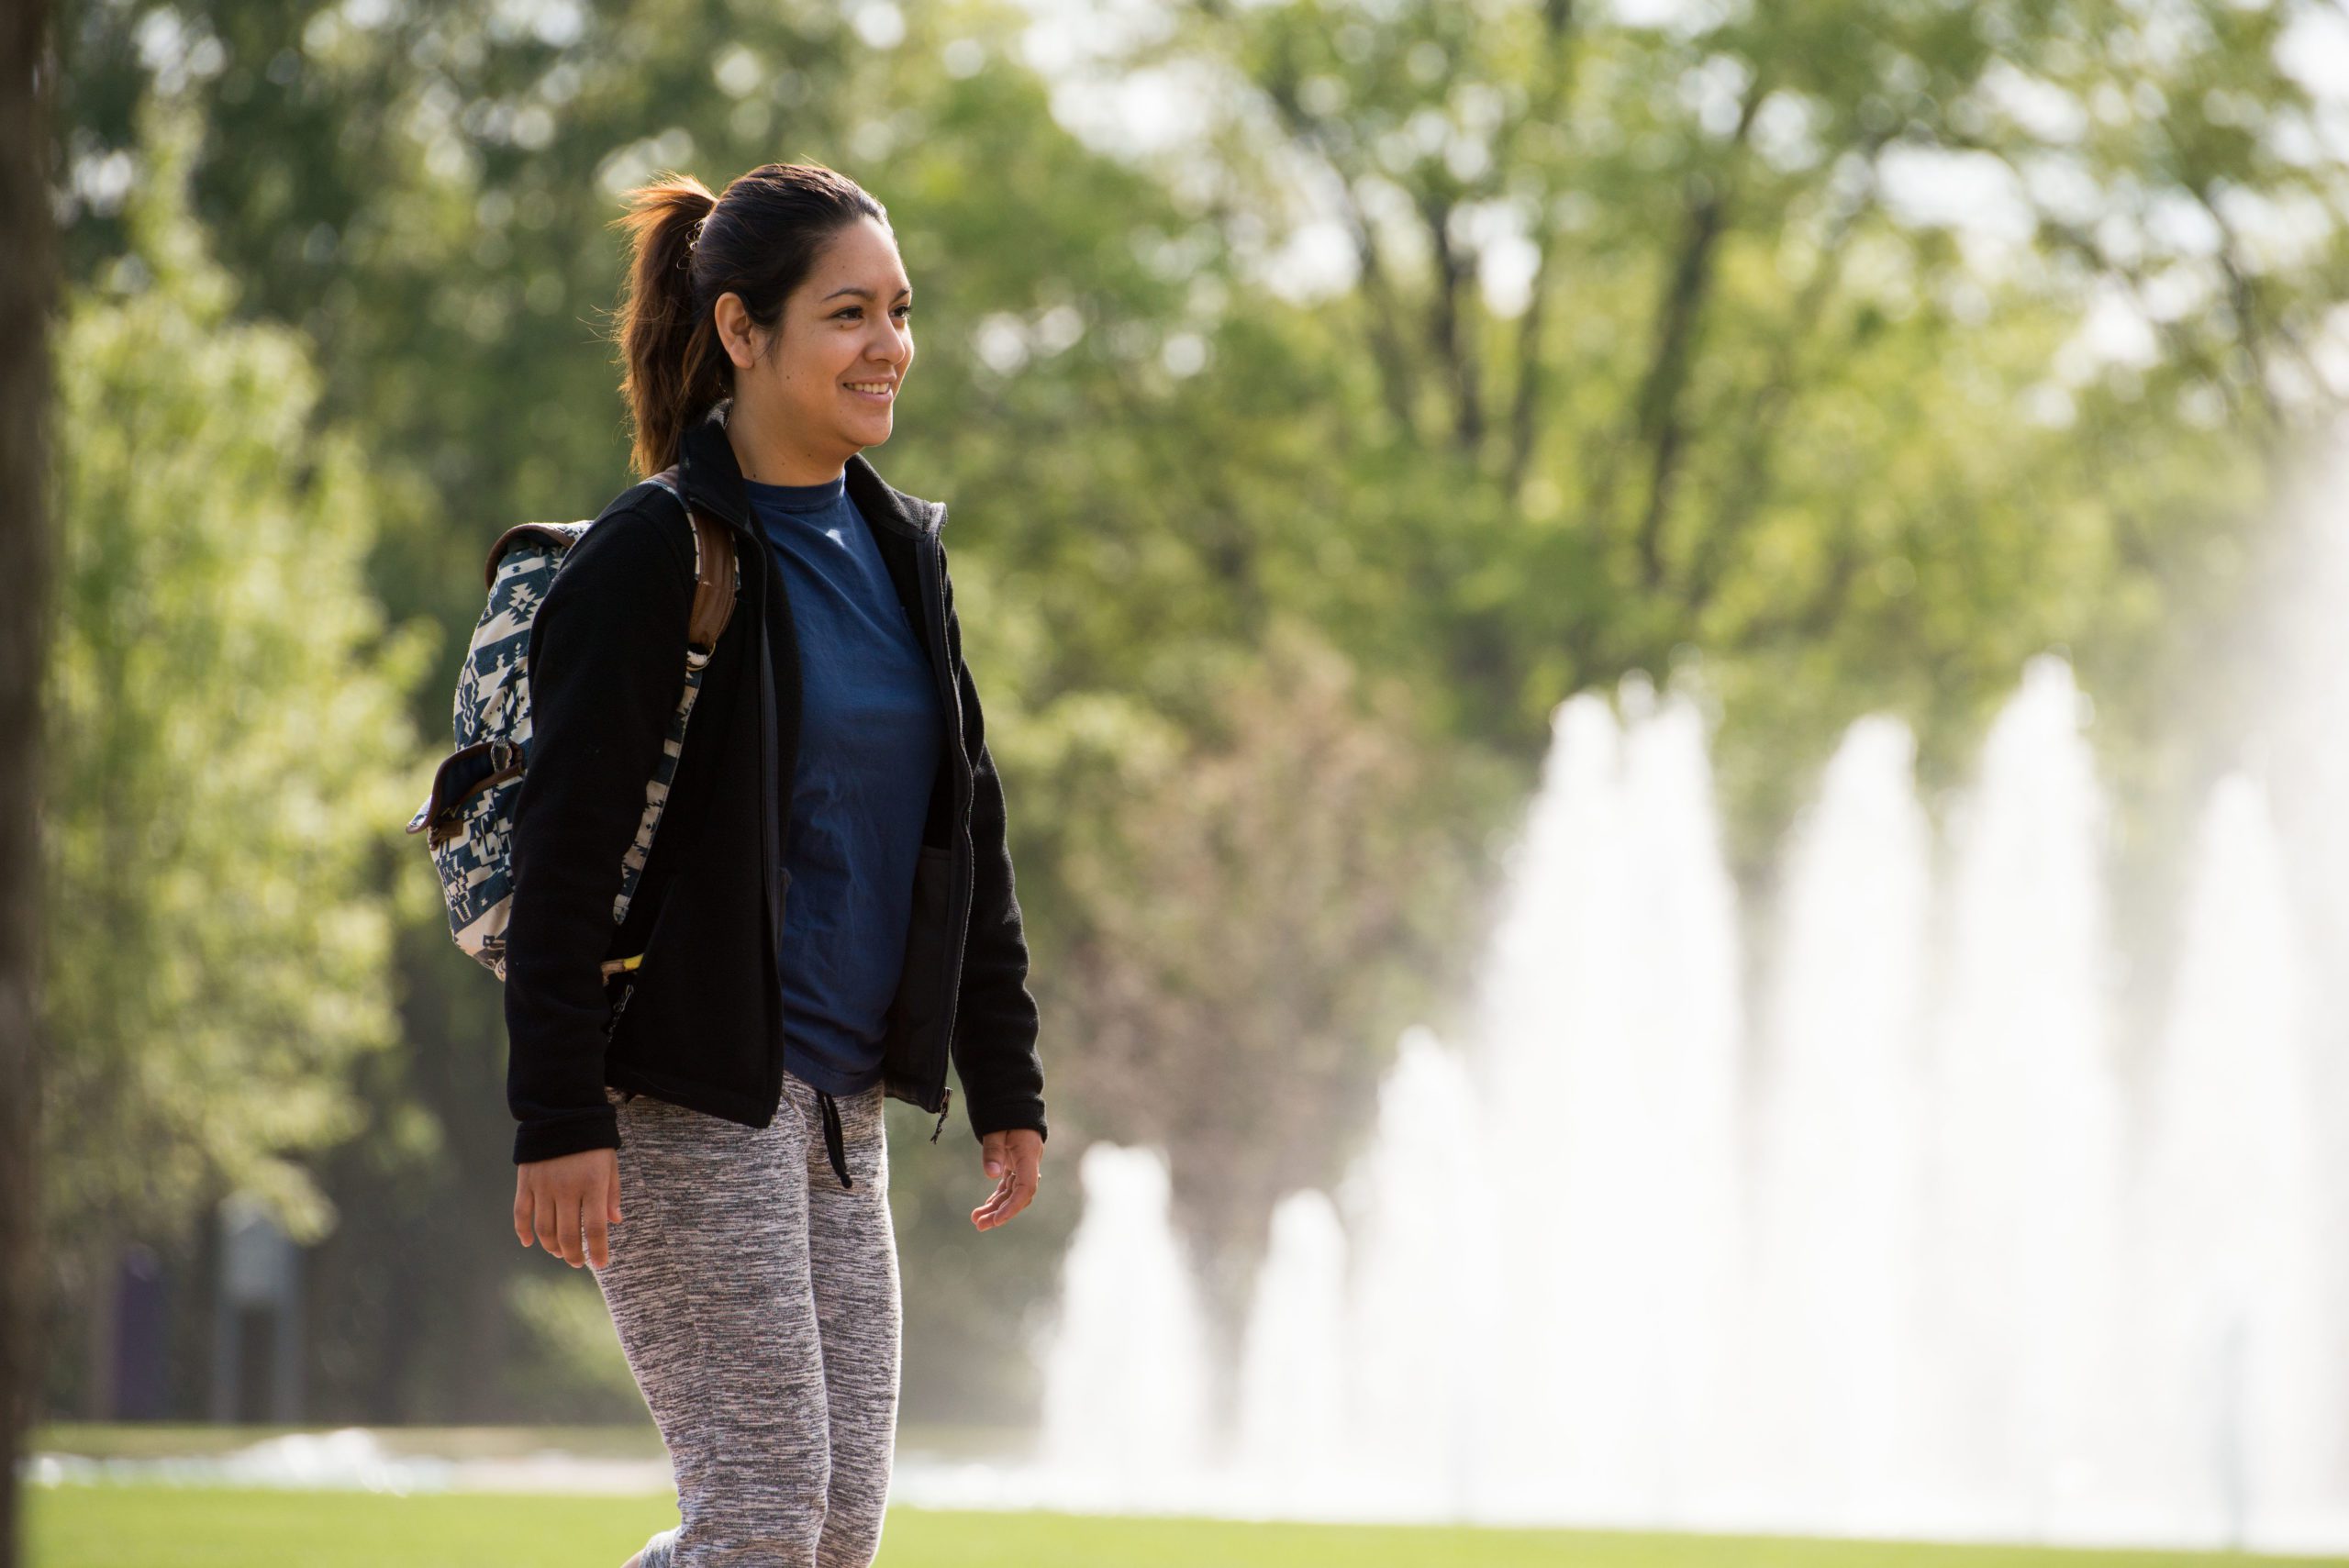 A student walks outside in front of a water fountain display on campus